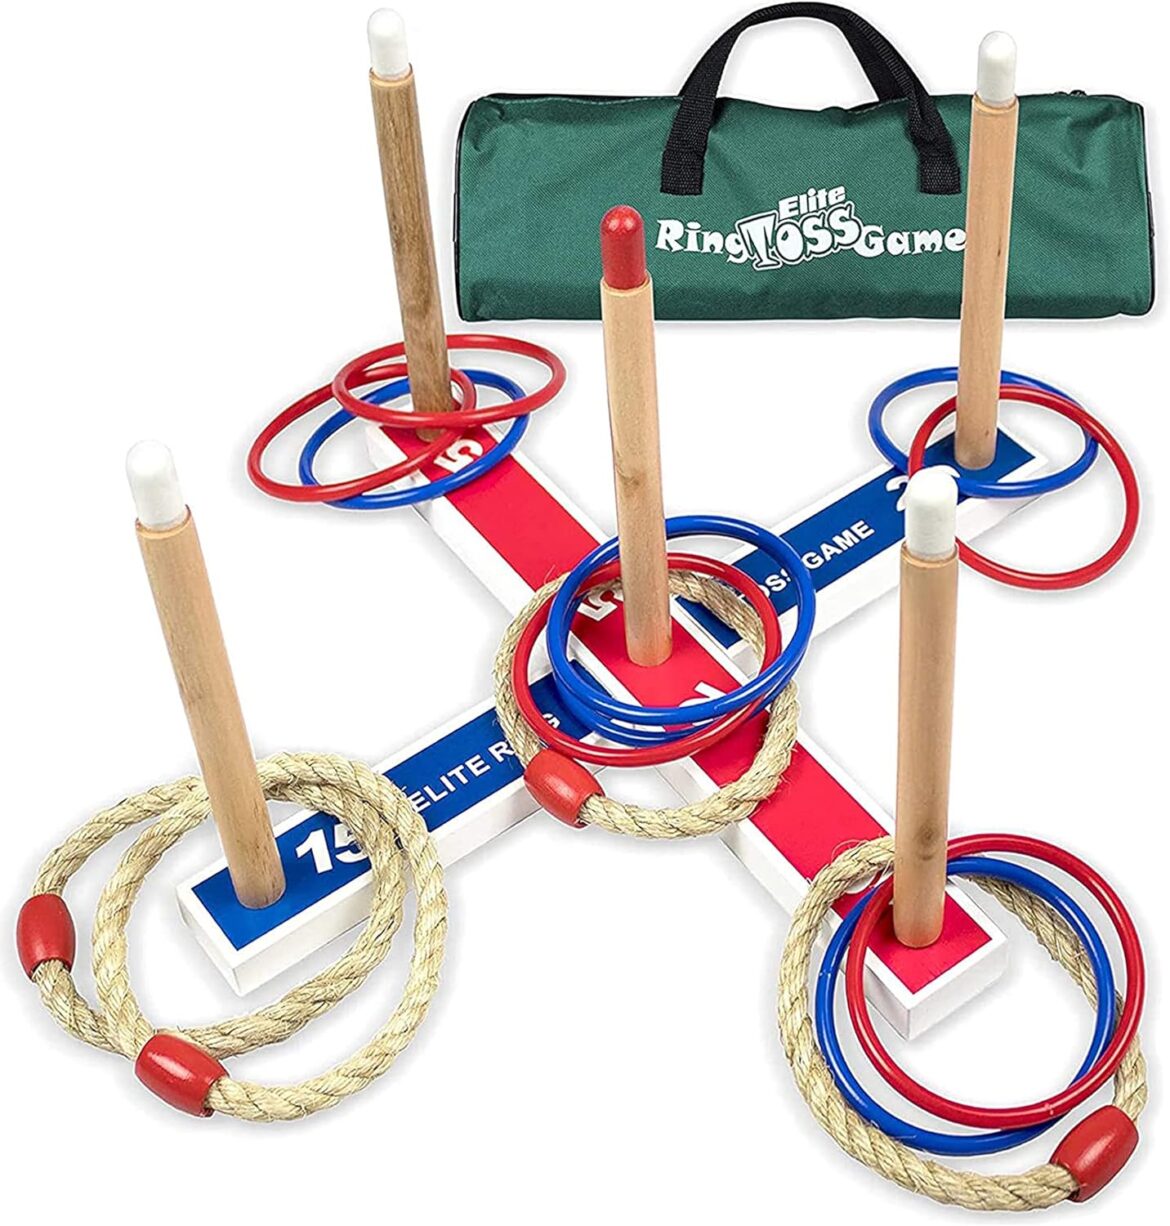 "Fun and Skill-building with Elite Sportz Ring Toss Games for Kids"